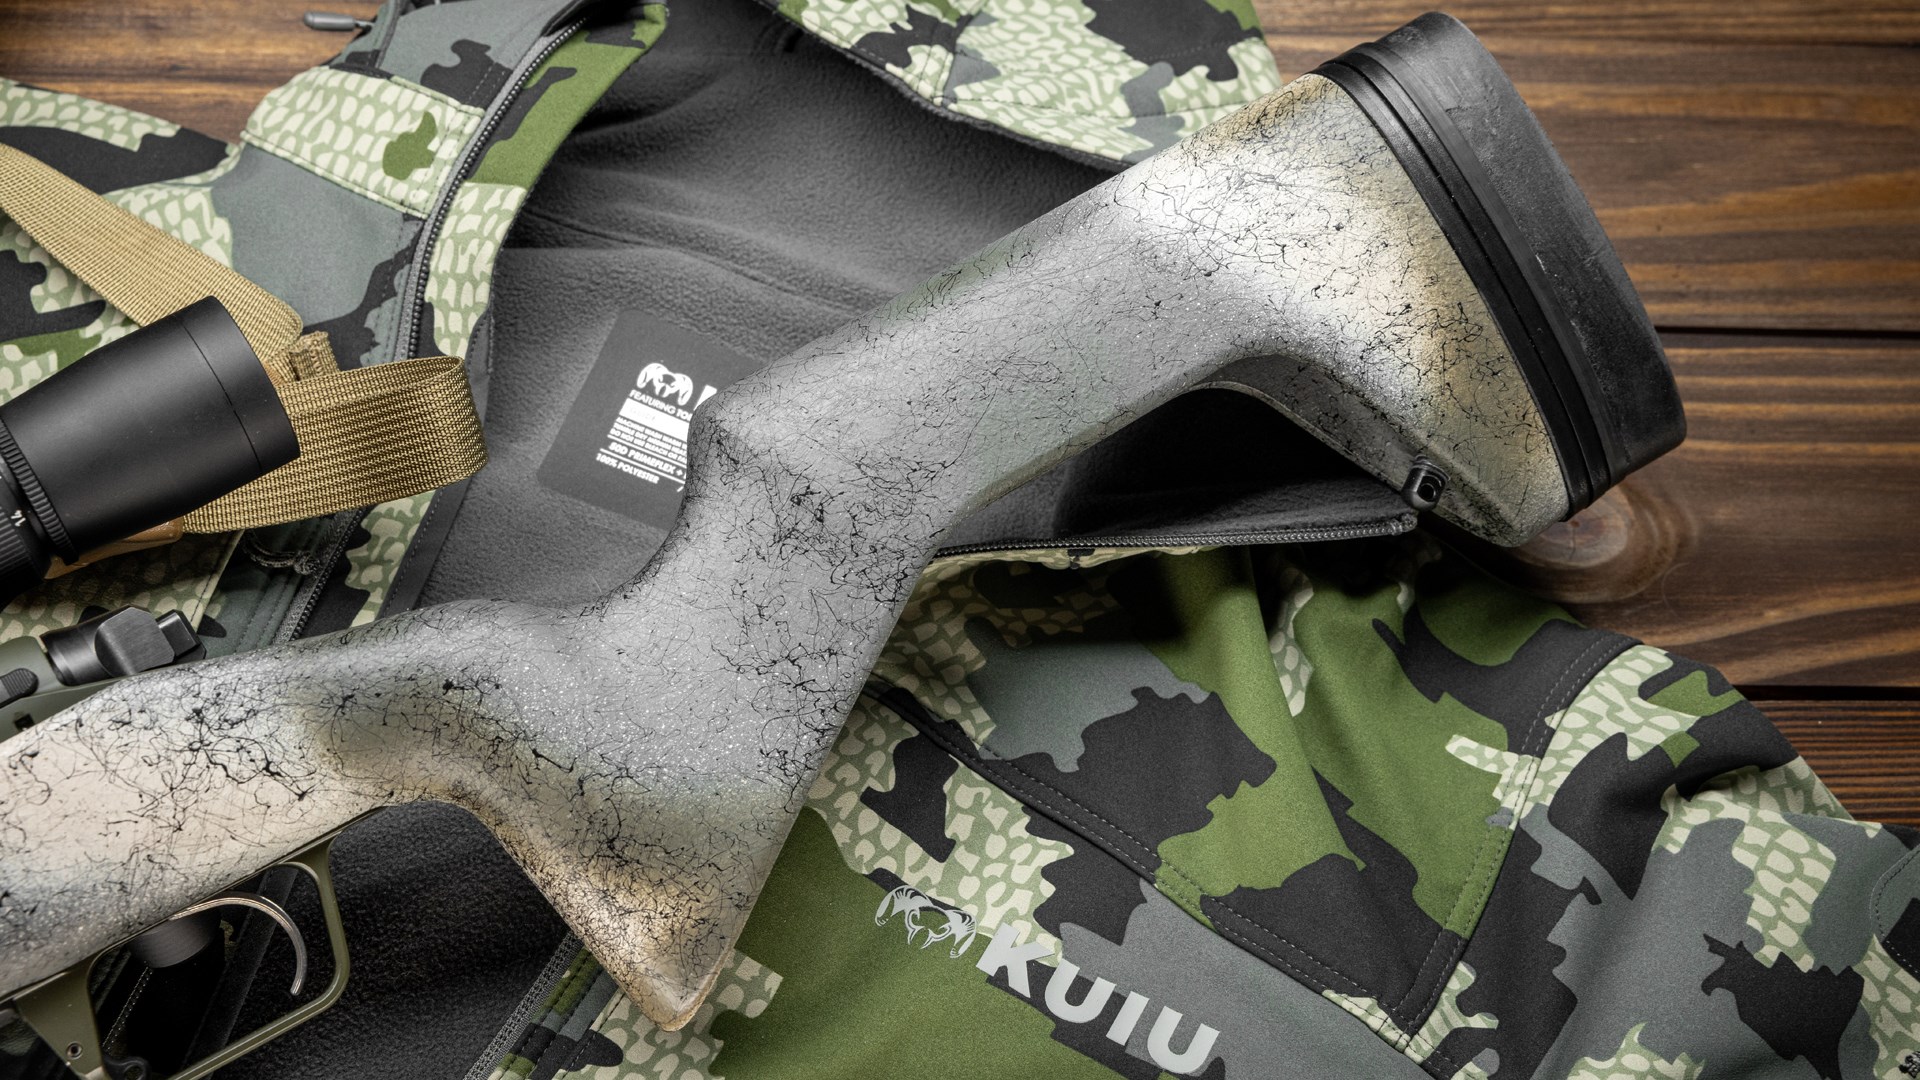 The hollowed-out minimalist buttstock from Grayboe Stocks shown on the Springfield Model 2020 Redline on top of a Kuiu camouflage coat.